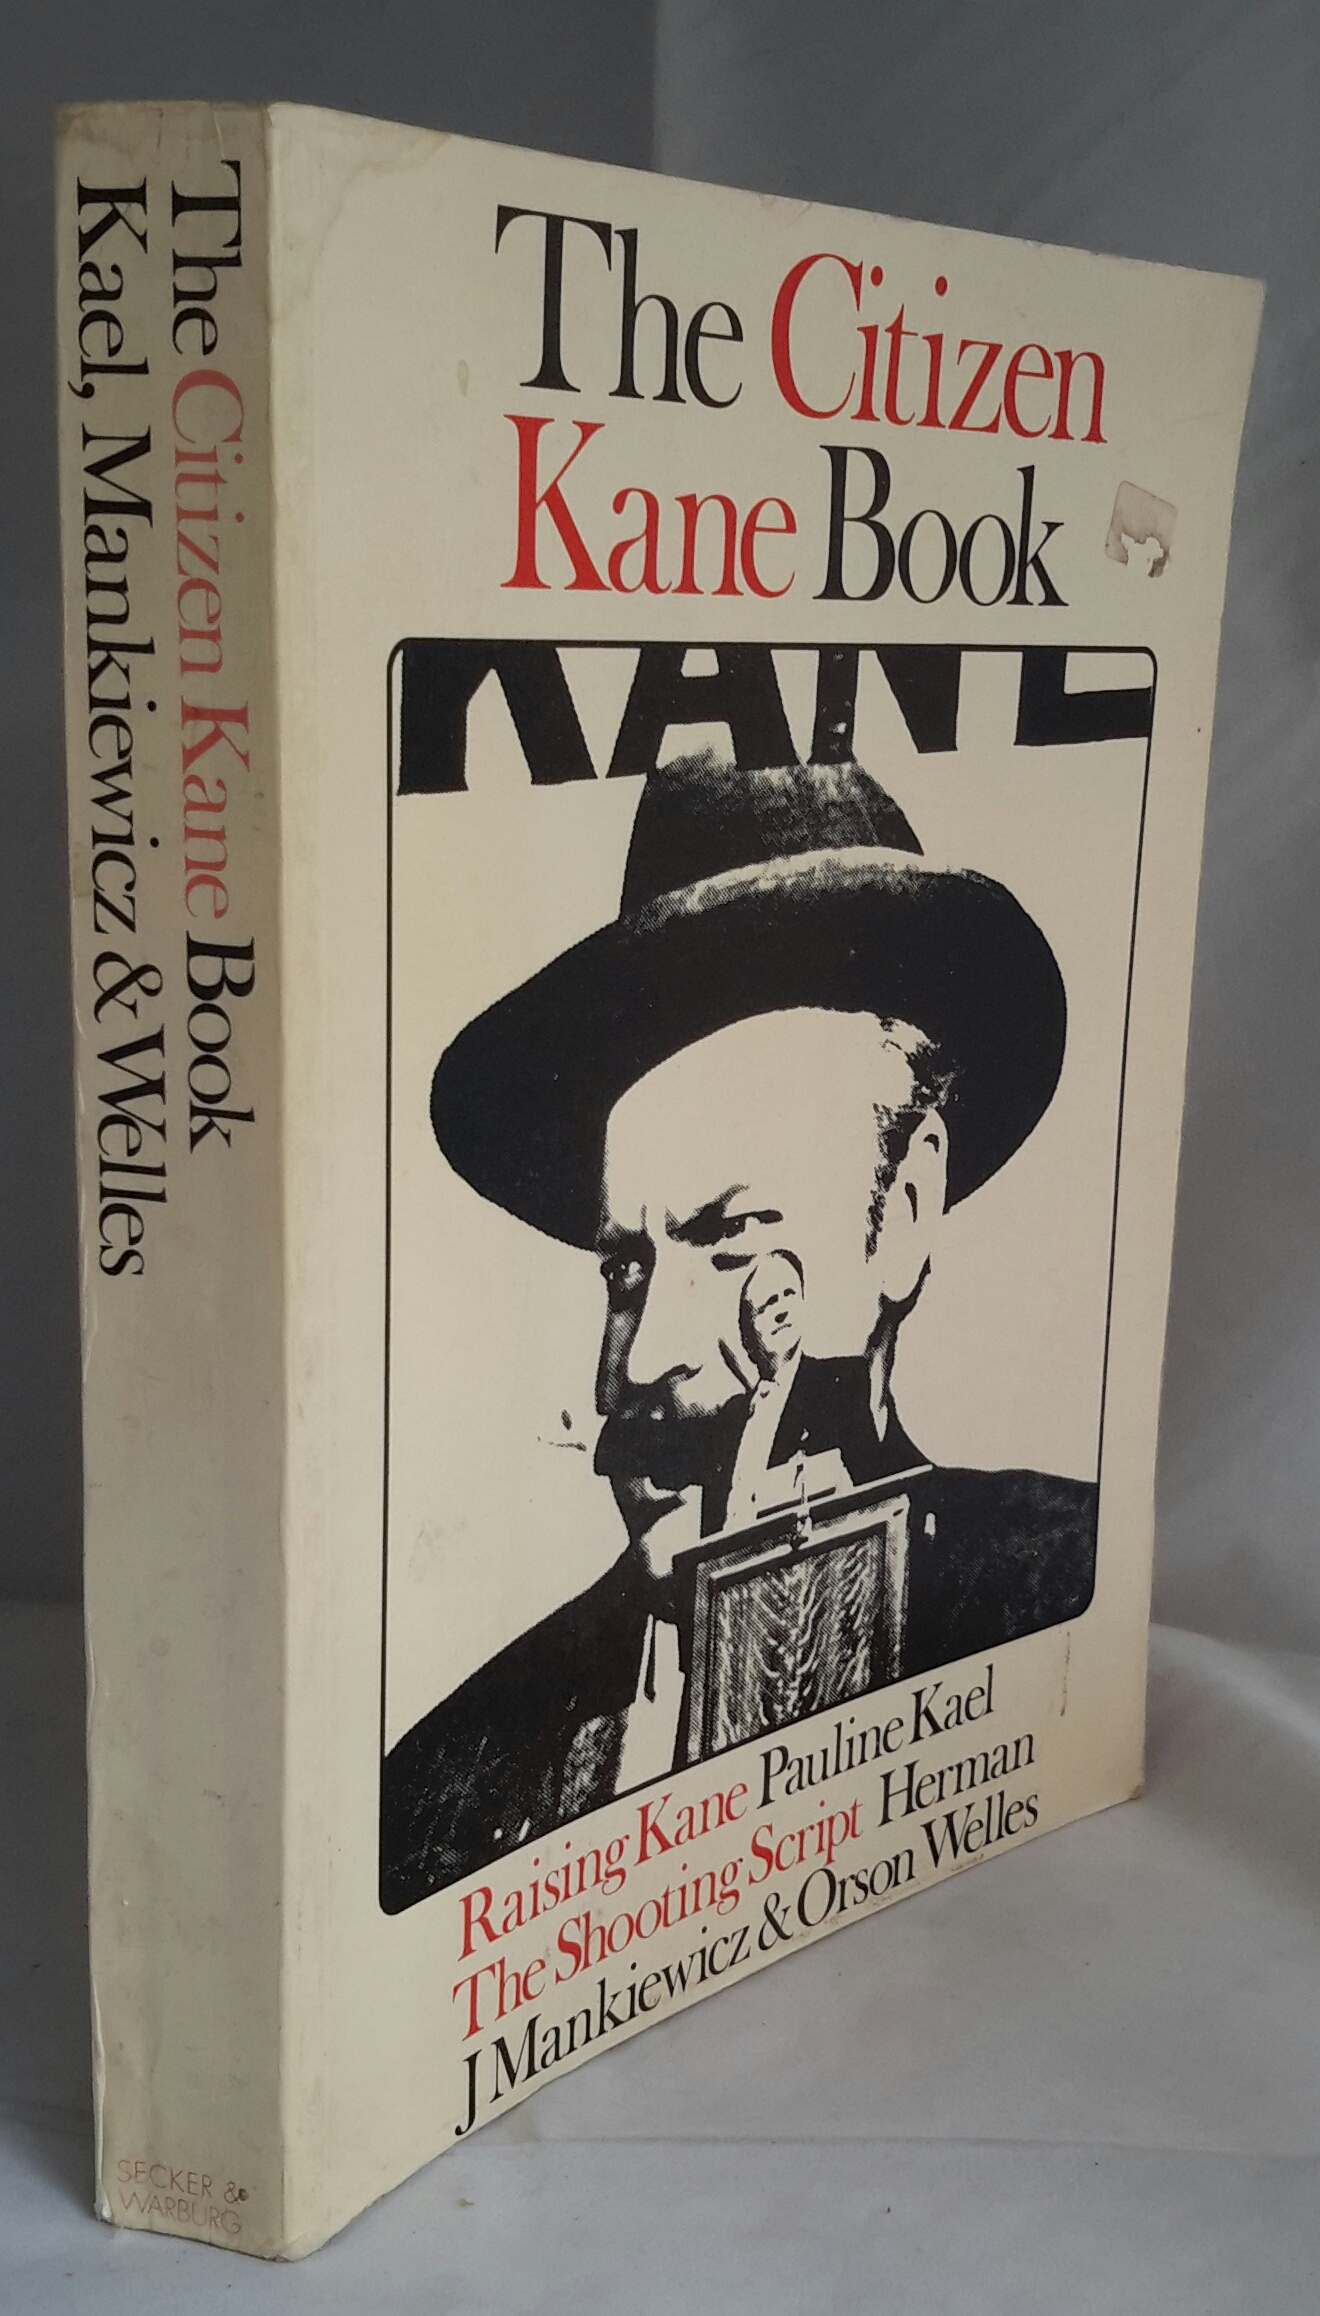 The Citizen Kane Book. Raising Kane by Pauline Kael. The Shooting Script by Herman J. Mankiewicz and Orson Welles. And the Cutting Continuity of the Completed Film. - KAEL, Pauline. Herman J. Mankiewicz and Orson Welles.